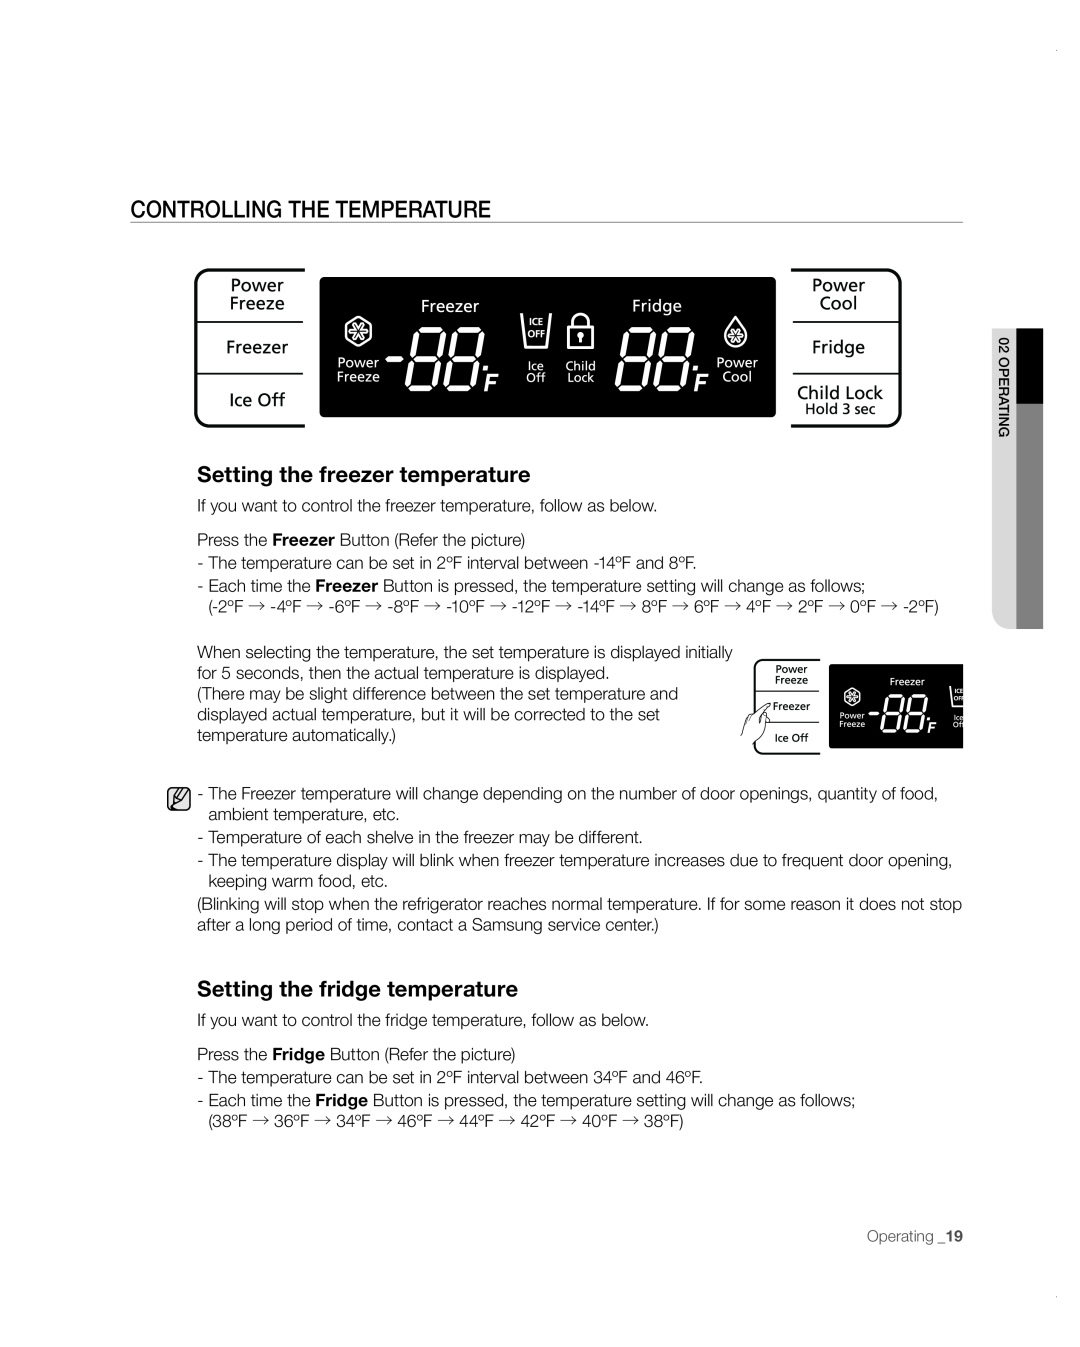 Samsung RB197ABBP user manual Controlling the temperature, Setting the freezer temperature, Setting the fridge temperature 